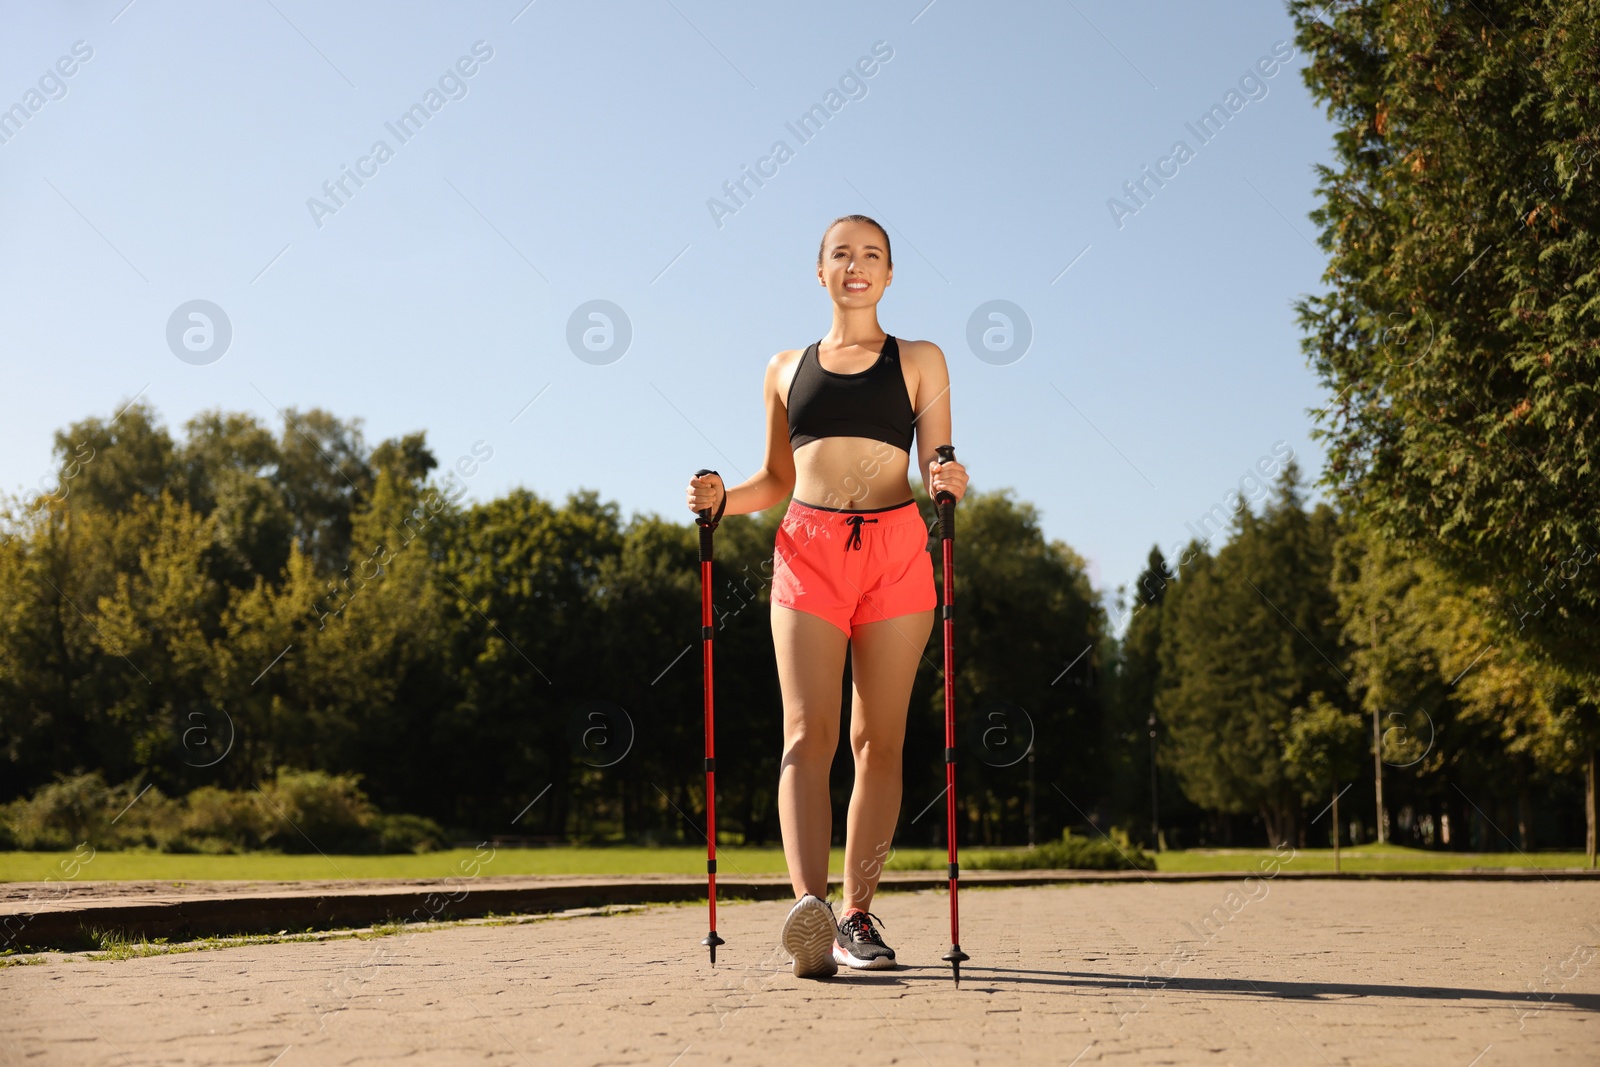 Photo of Happy woman practicing Nordic walking with poles in park on sunny day